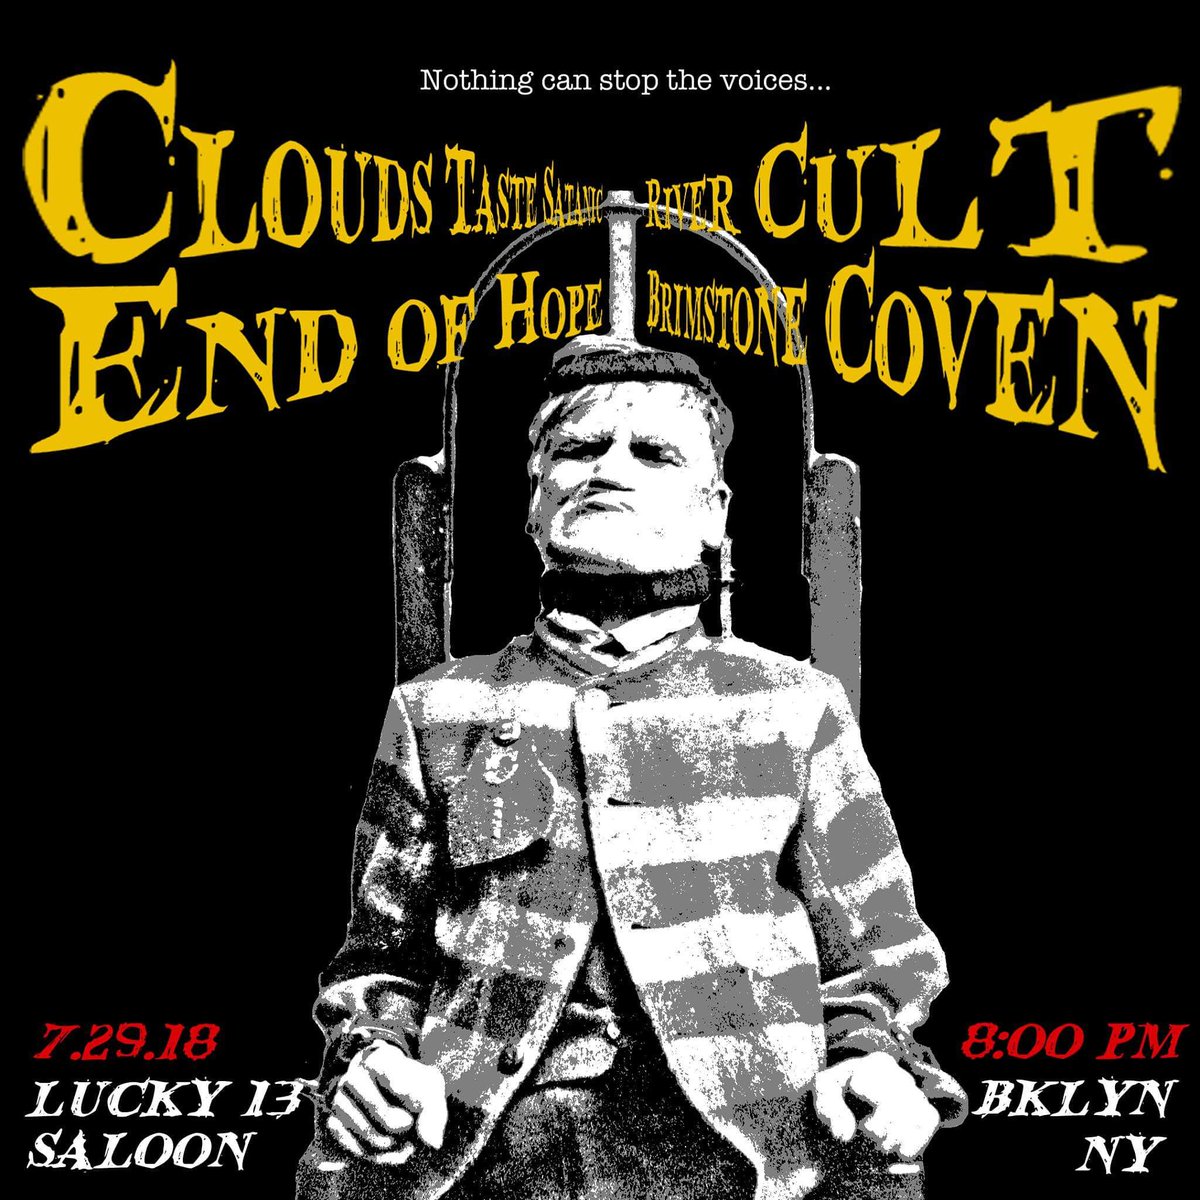 July 29th at #Lucky13 in #Brooklyn with #CloudsTasteSatanic #EndOfHope and @BrimstoneCoven #stoner #doom #nyc #heavy #rivercult @SatanicClouds